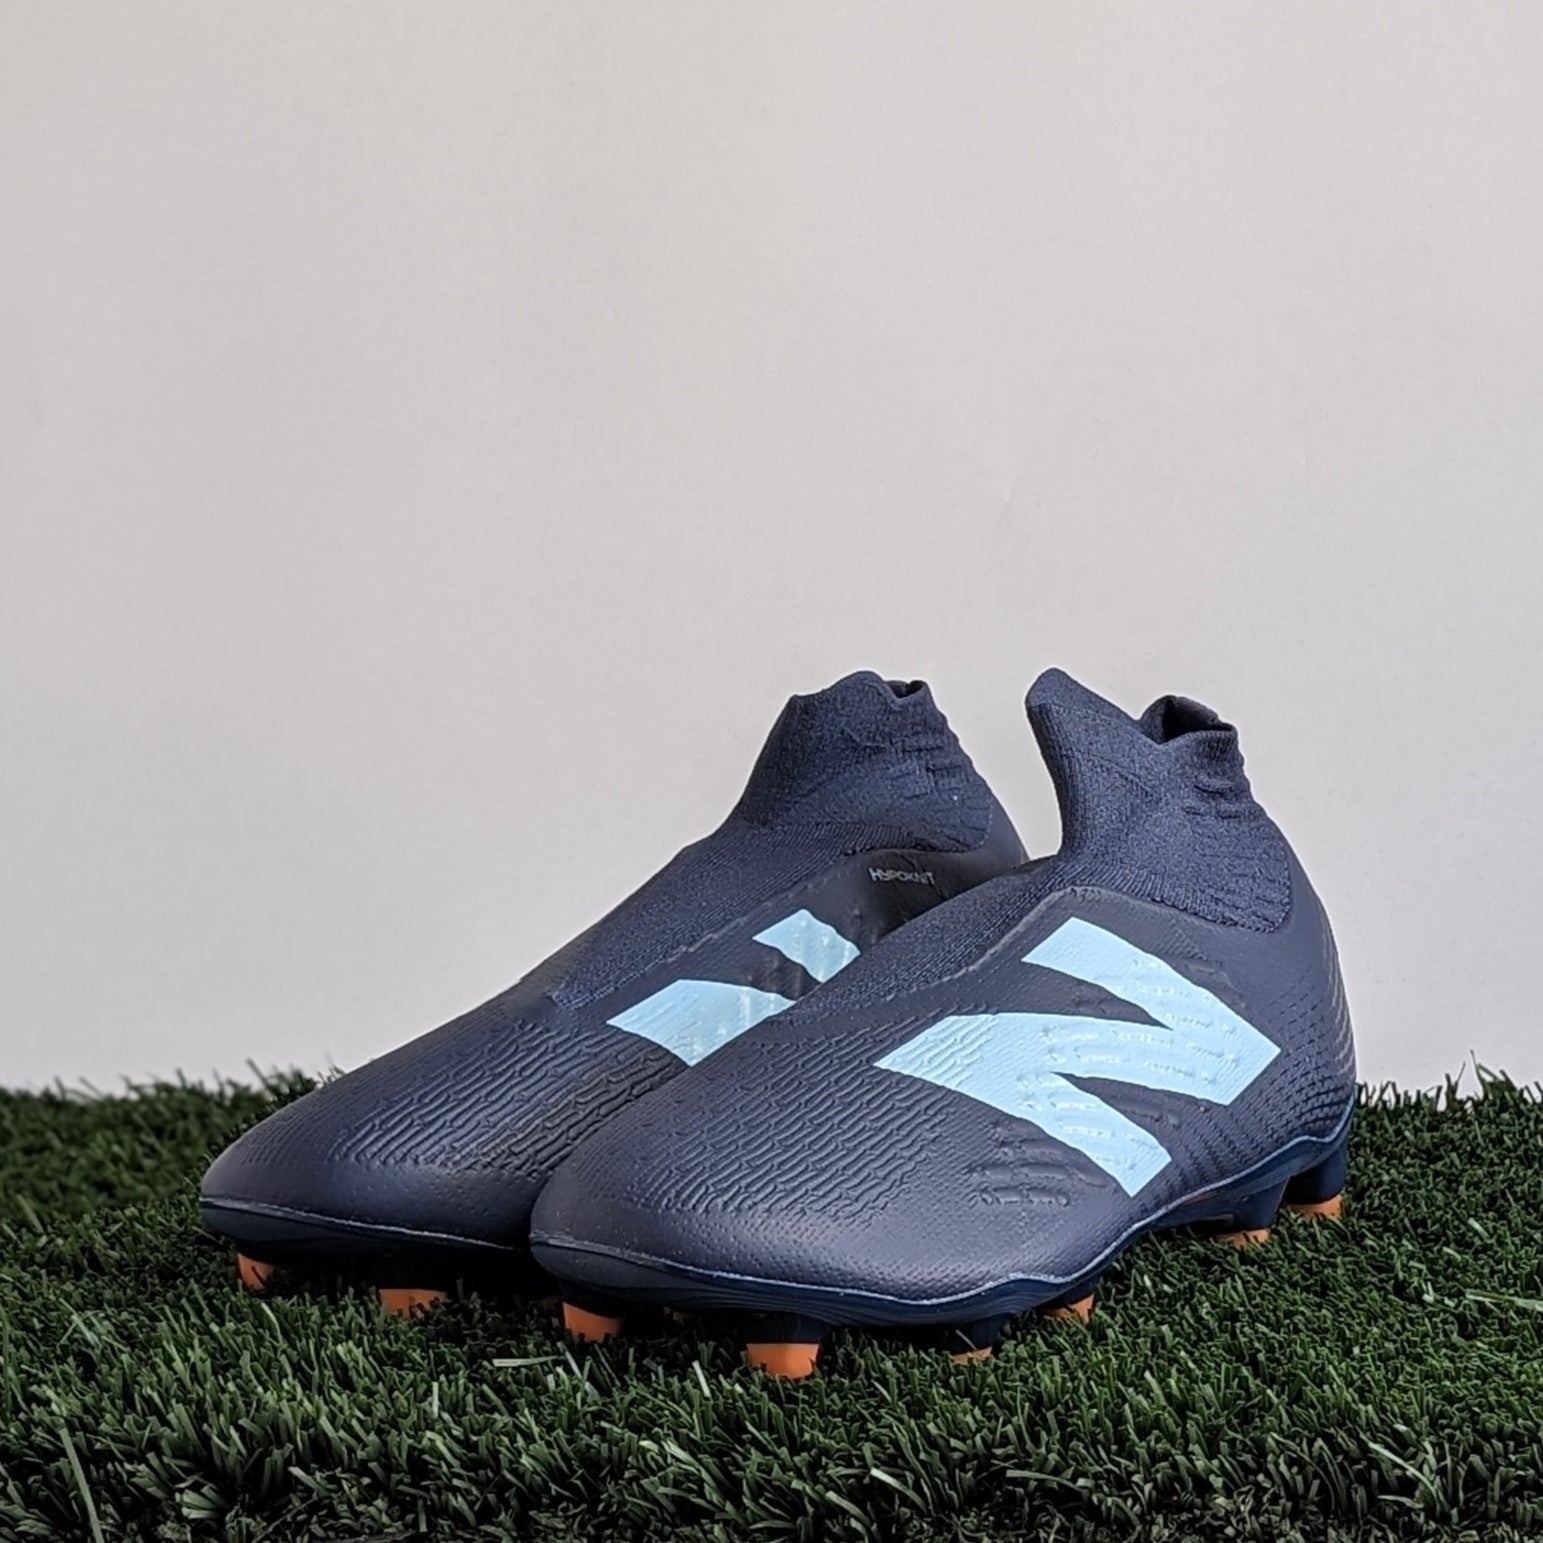 New Balance Launch The Tekela V2 'Pitch Control' Edition - SoccerBible